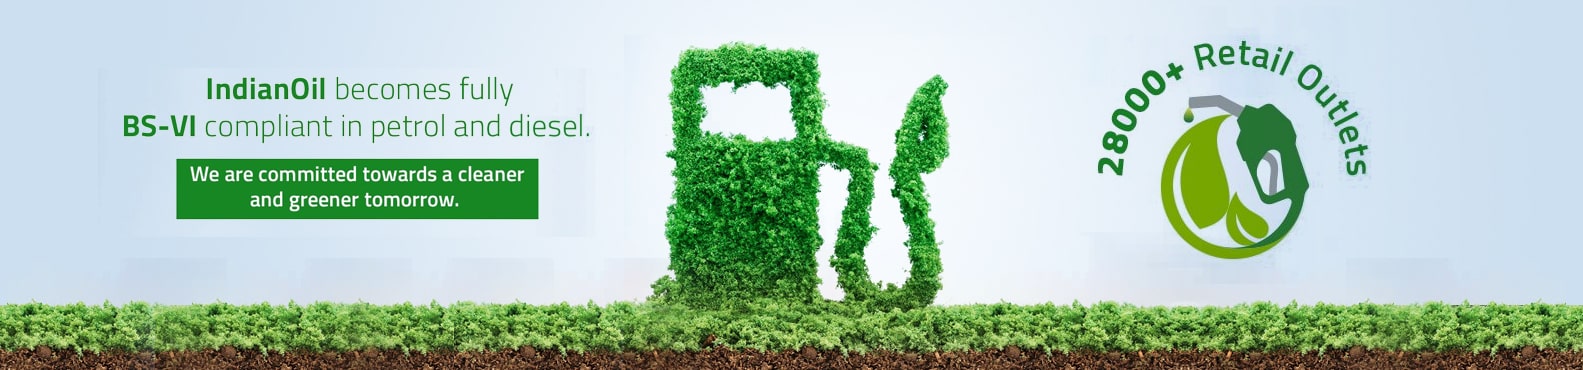 Indian Oil launches cleaner XtraGreen Diesel: Claims to increase fuel  economy - Car News